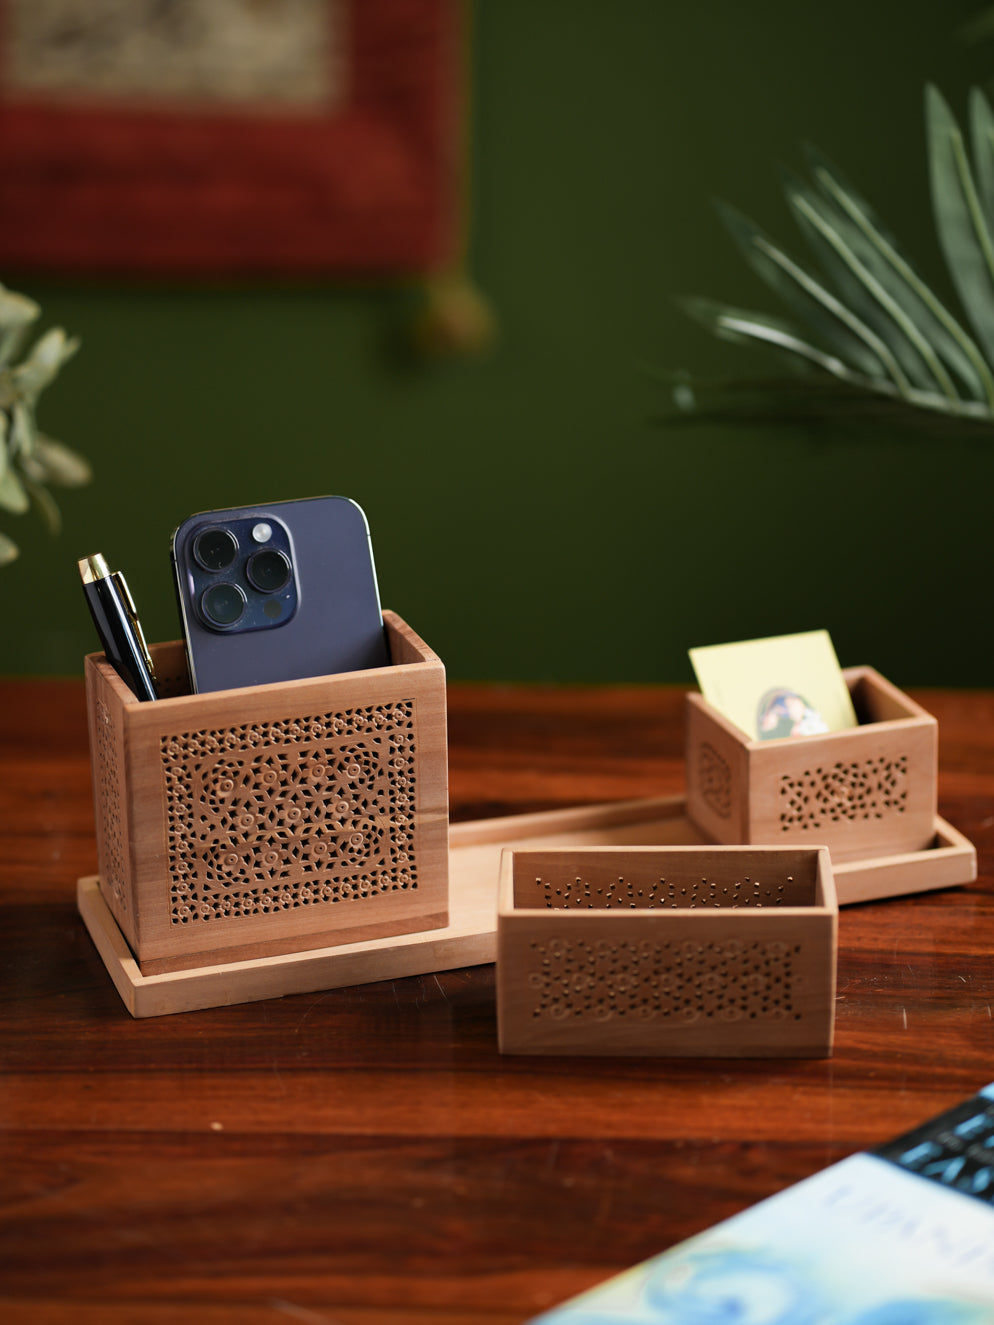 Load image into Gallery viewer, Wooden Jaali Desk Set - Pen Stand Square, Tray &amp; Card Holder &amp; Pin / Key Holder (Set of 4)